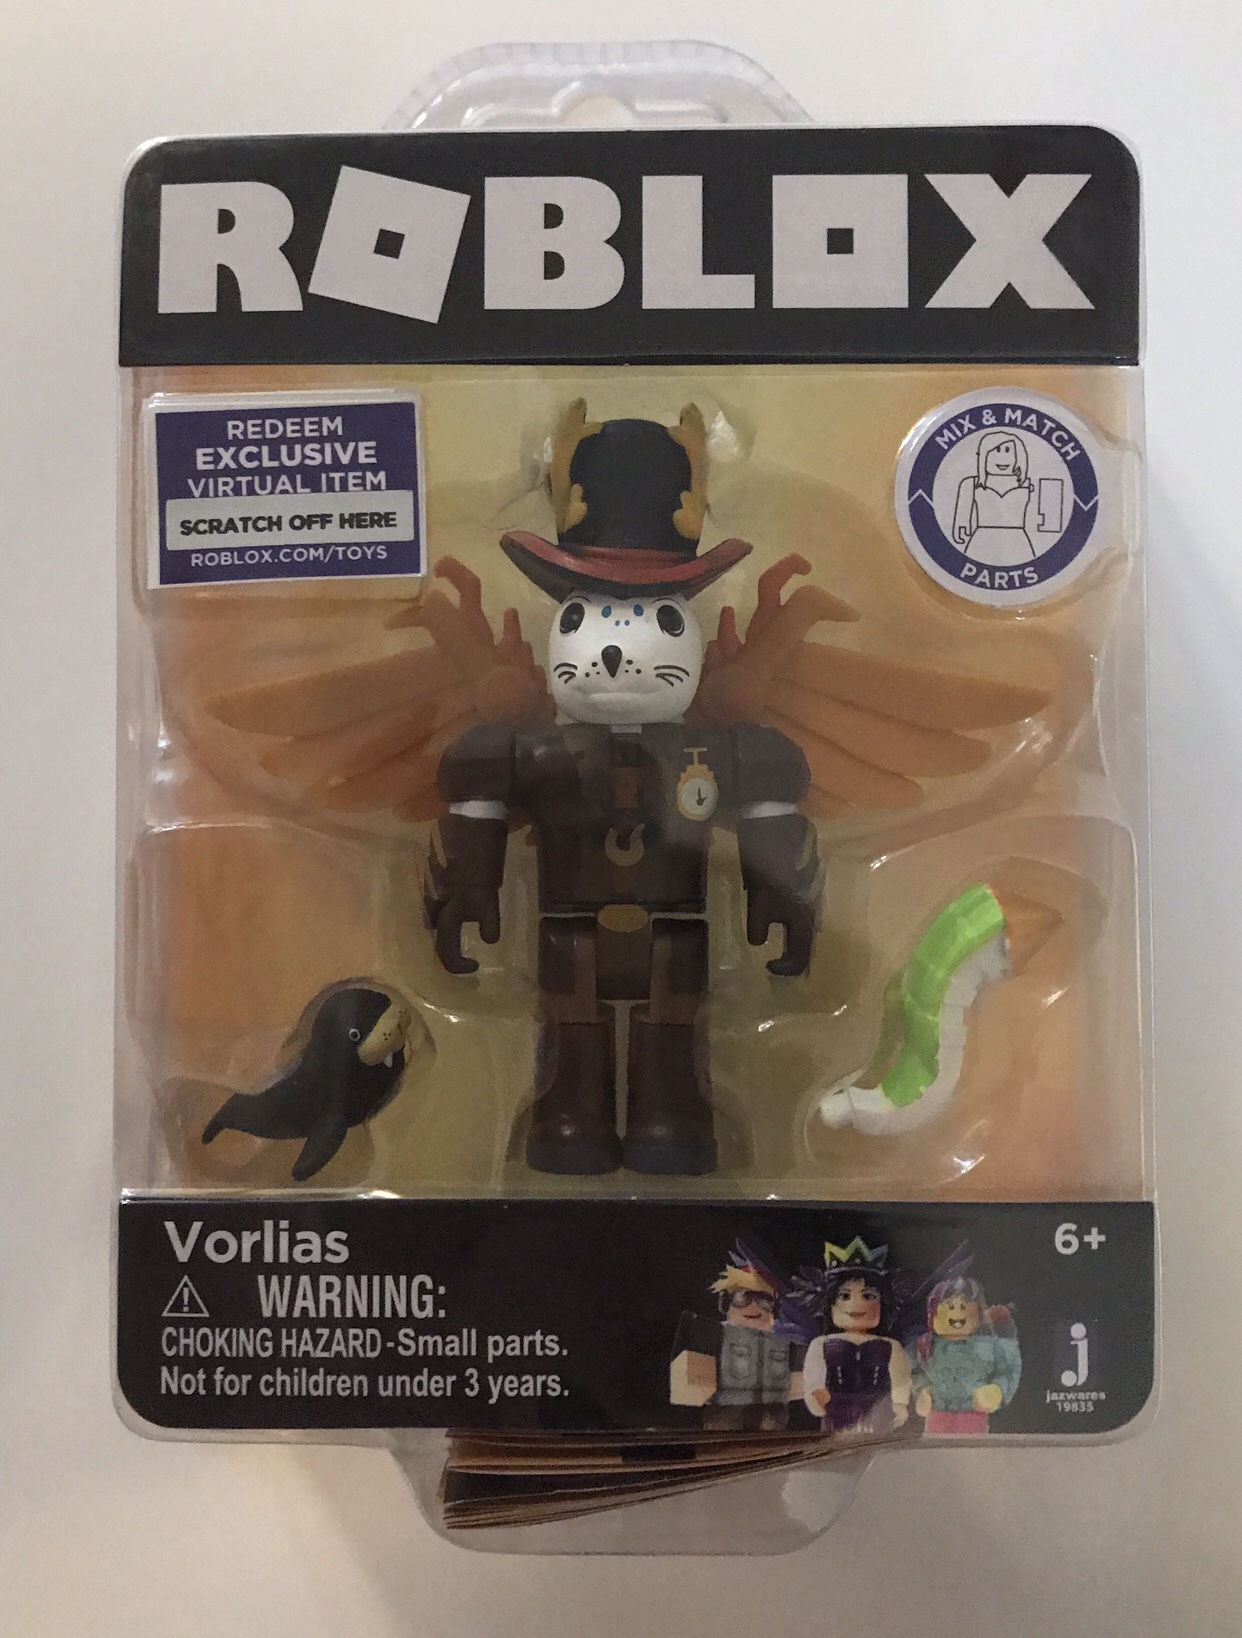 Reviewing The Roblox Celebrity Toy Range